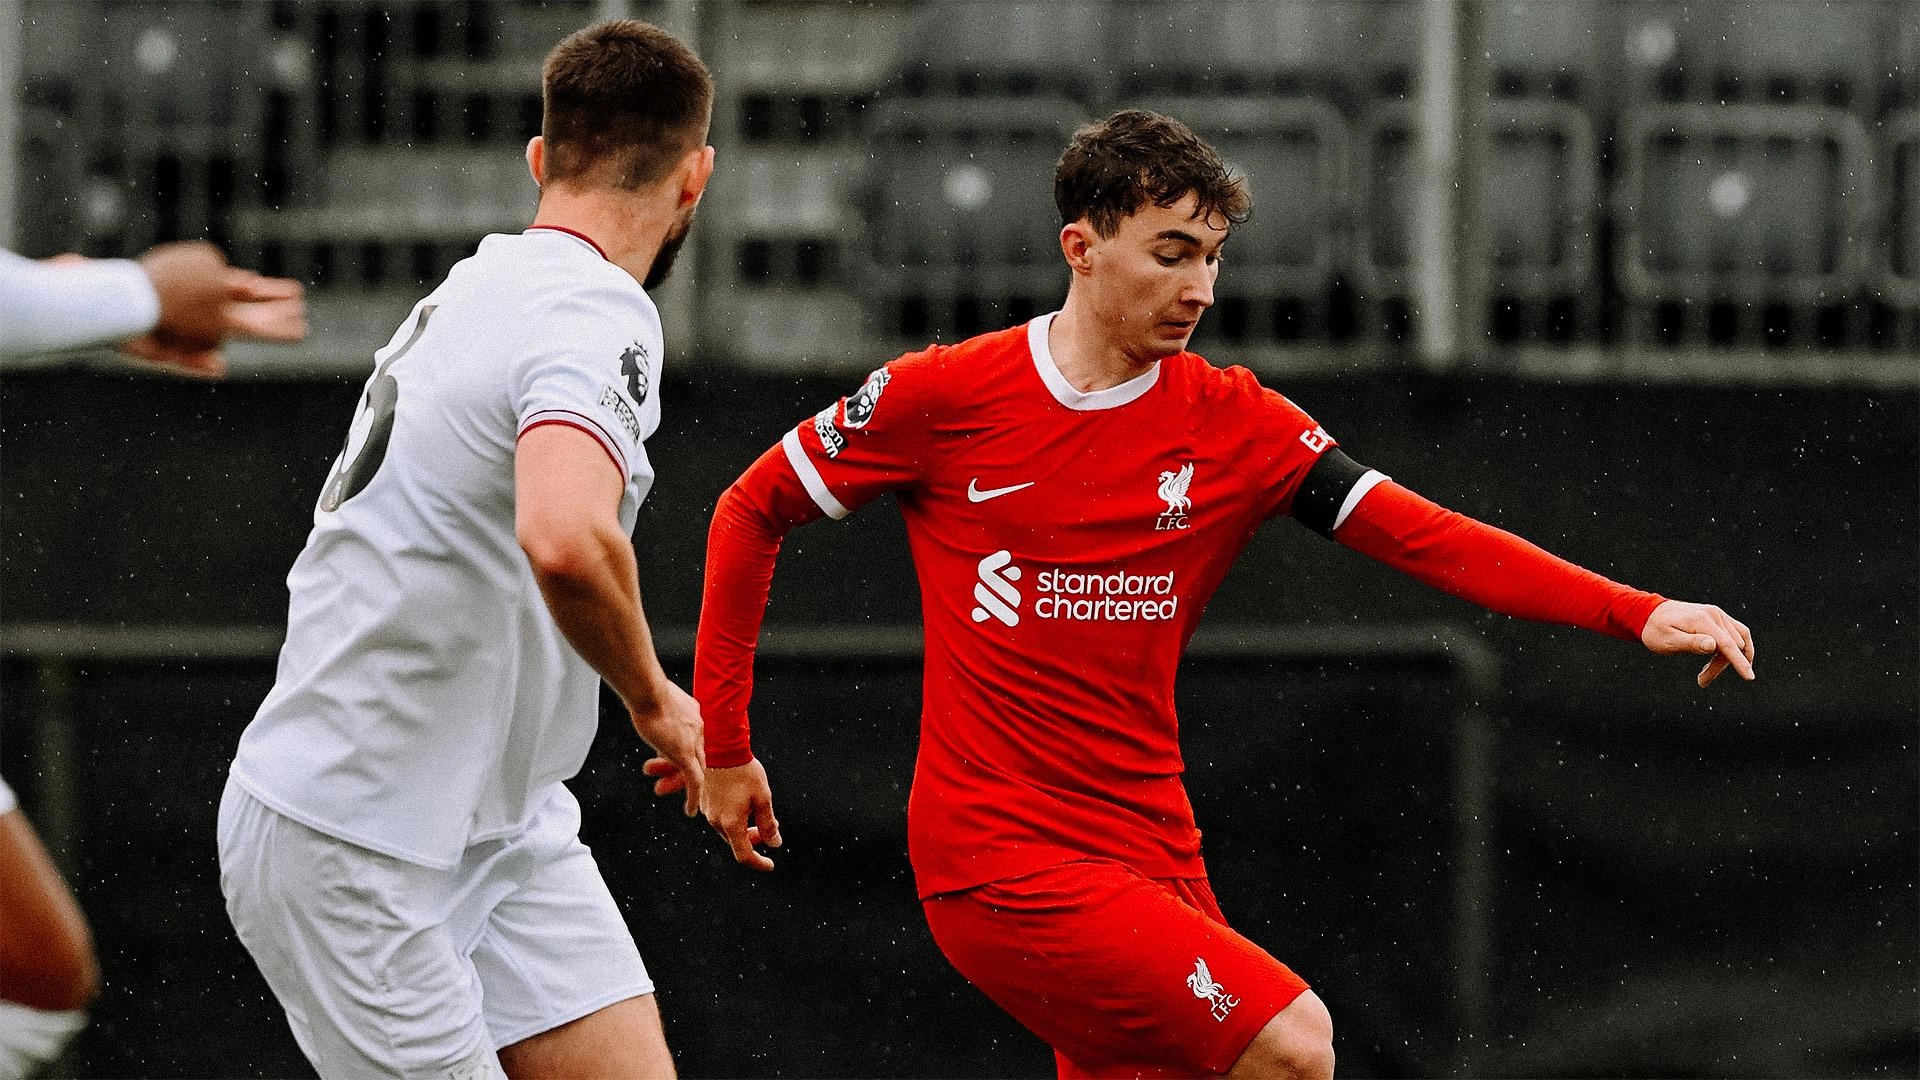 Us match report: Liverpool beaten by West Ham in PL2   Liverpool FC